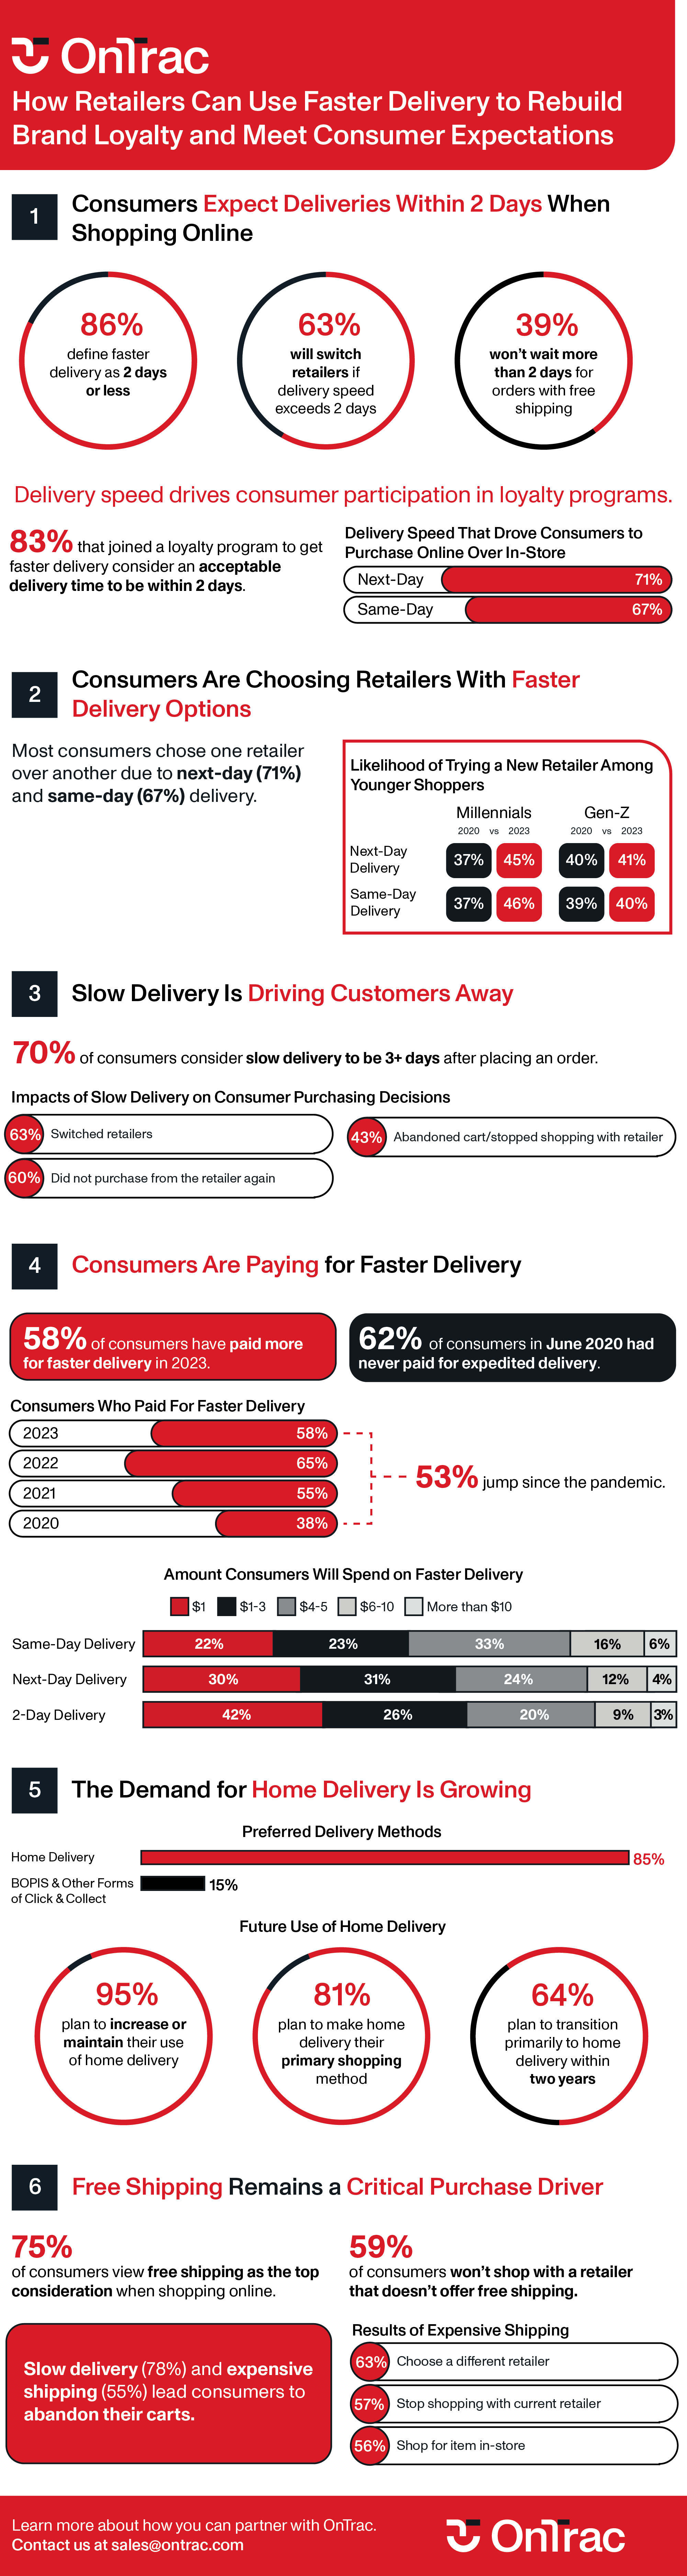 OnTrac Infographic - How Retailers Can Use Faster Delivery to Rebuild Brand Loyalty and Meet Consumer Expectations